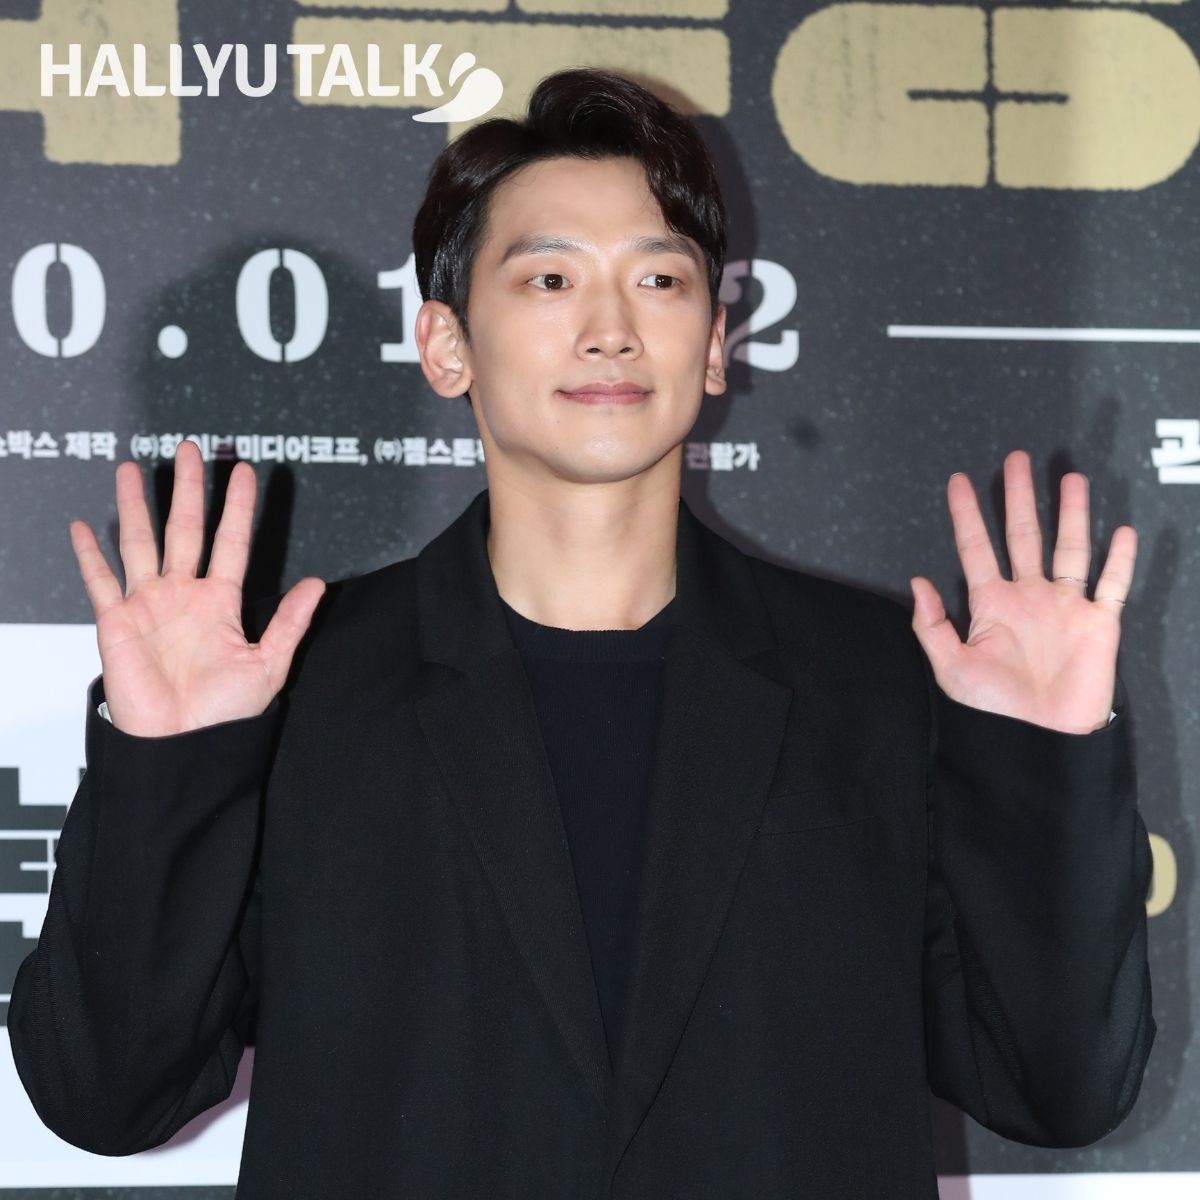 Rain poses at an event